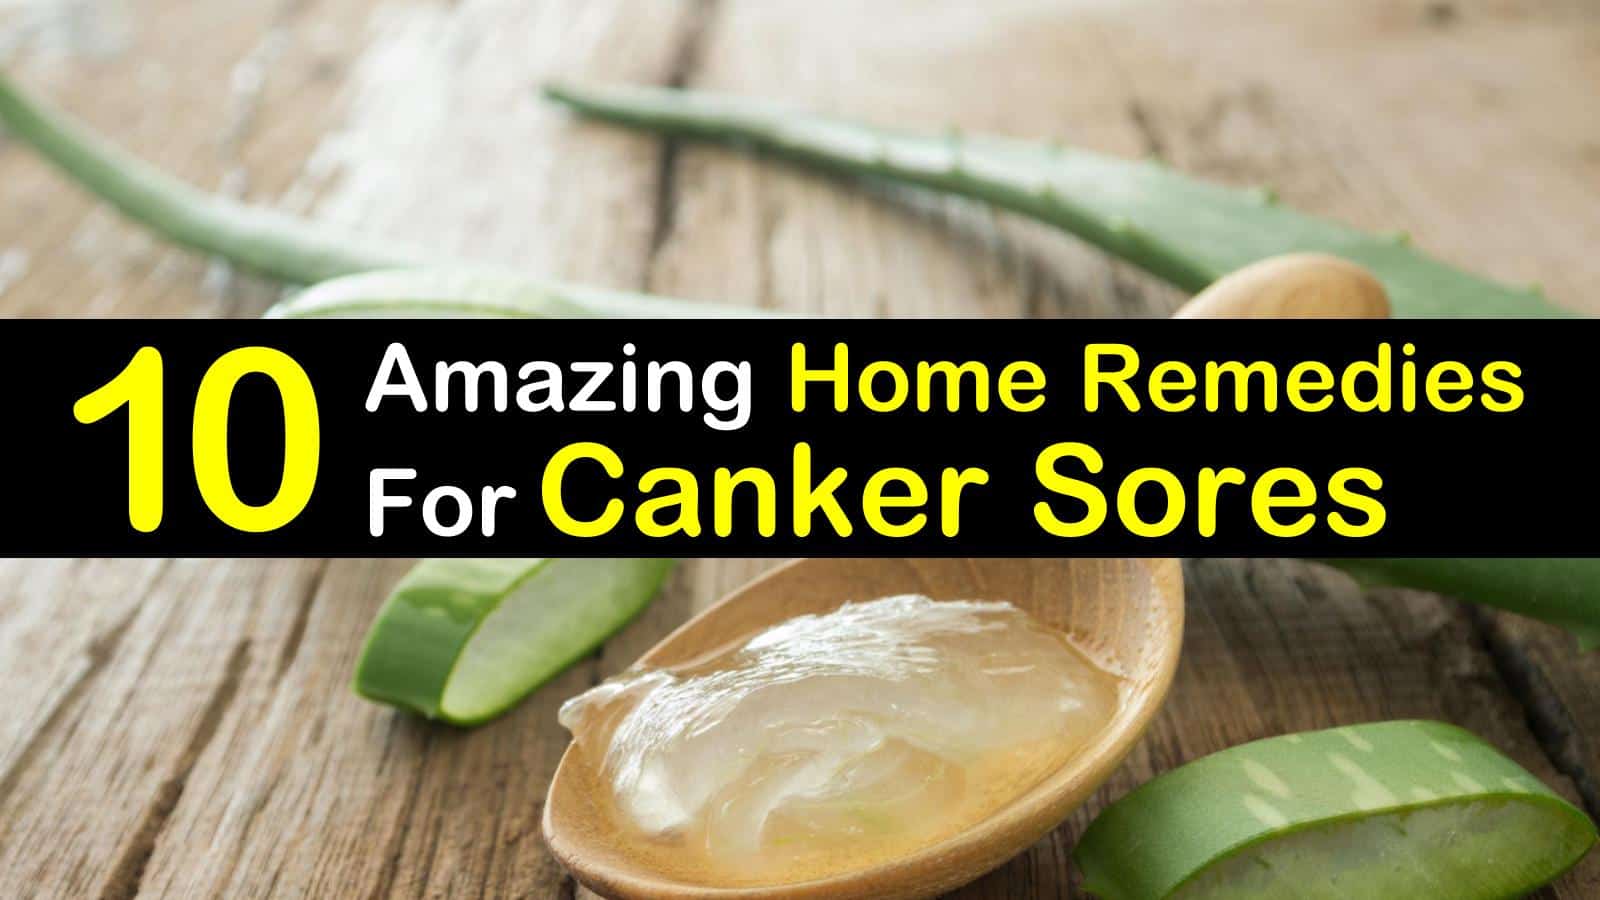 10 Amazing Home Remedies For Canker Sores titleimg1